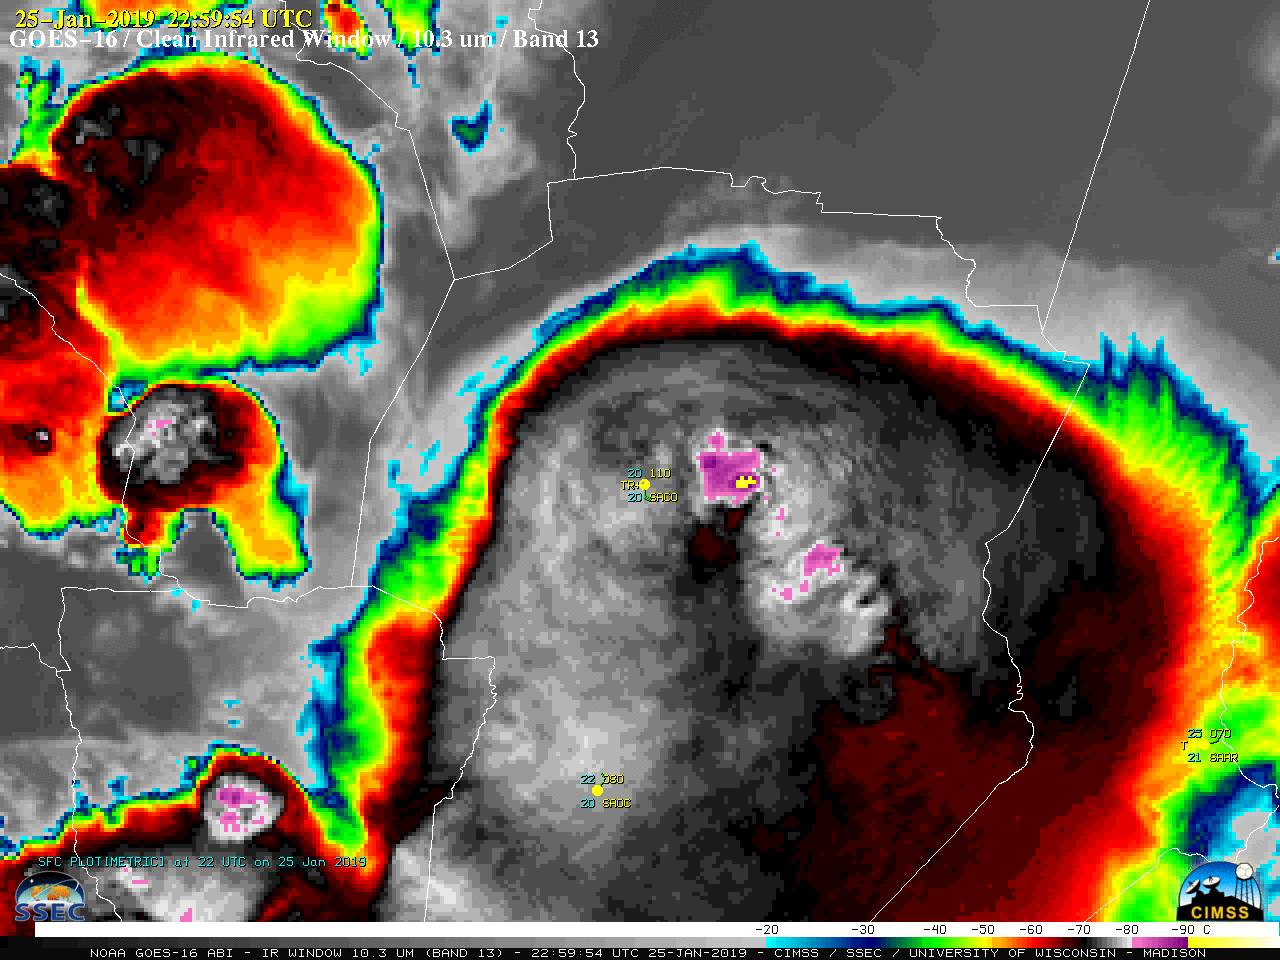 GOES-16 "Clean" Infrared Window (10.3 µm) images [click to play MP4 animation]